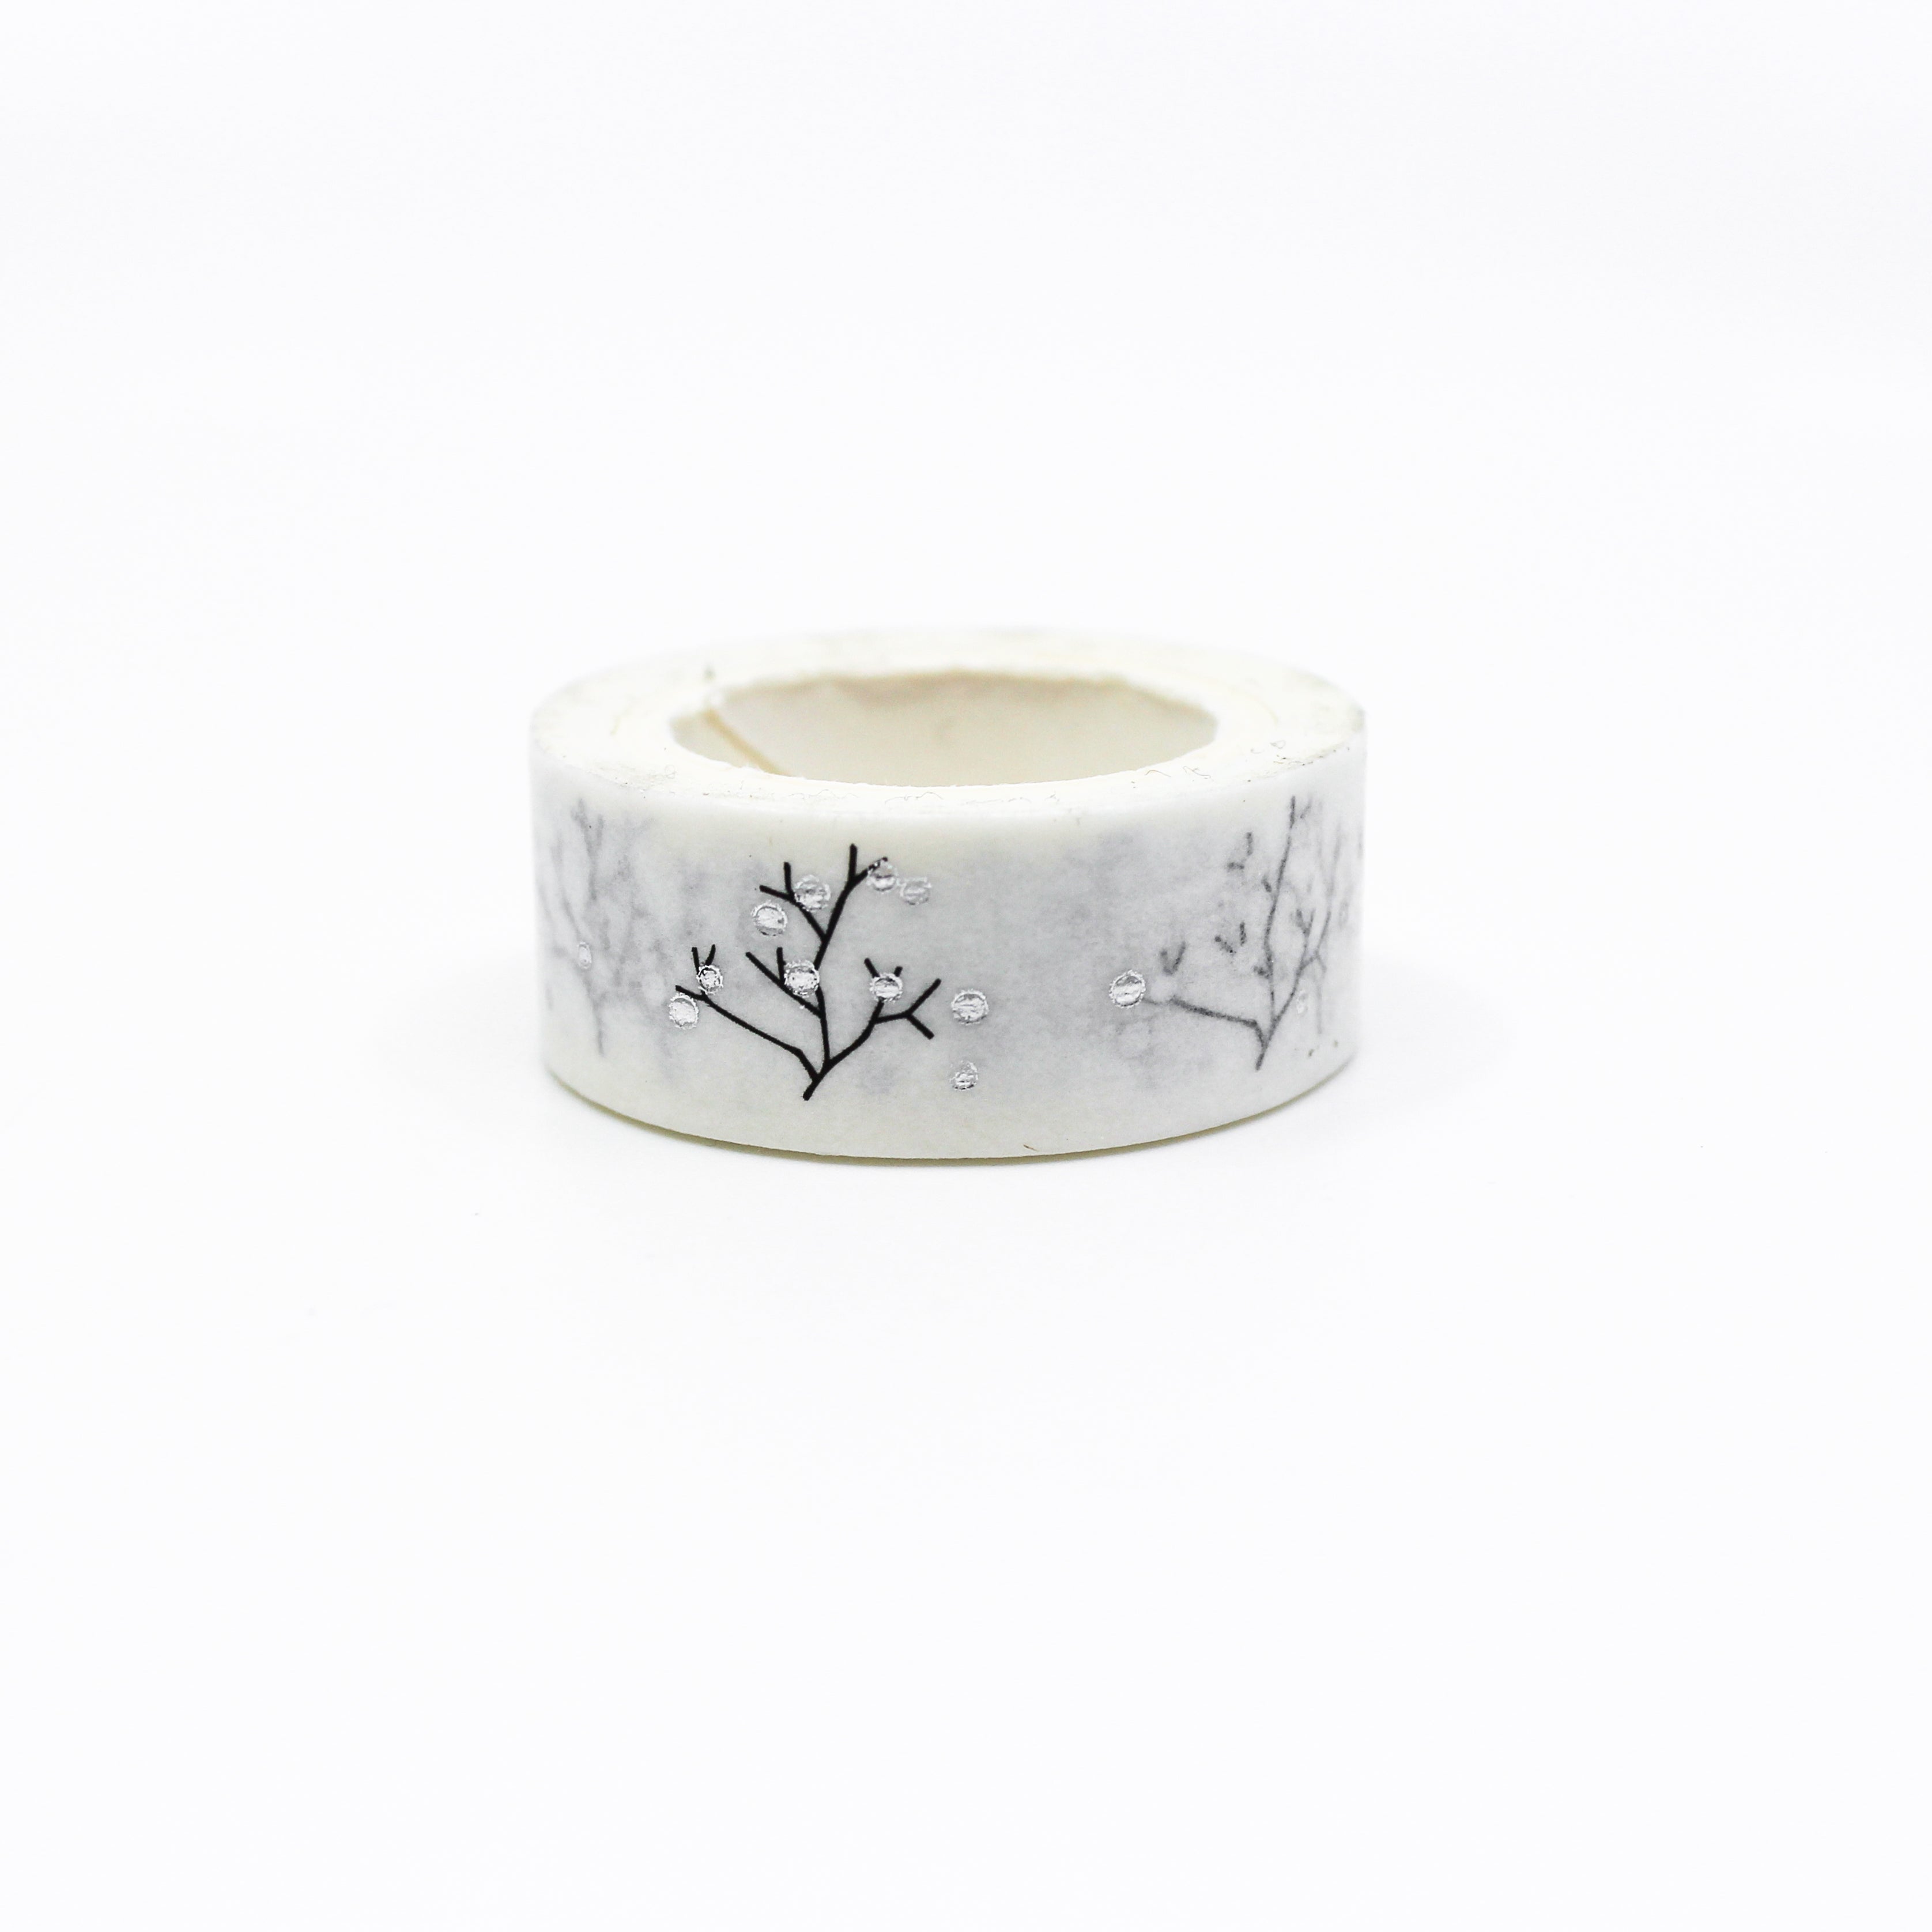 This is a cute black sprig with silver foil leaf washi tapes from BBB Supplies Craft Shop